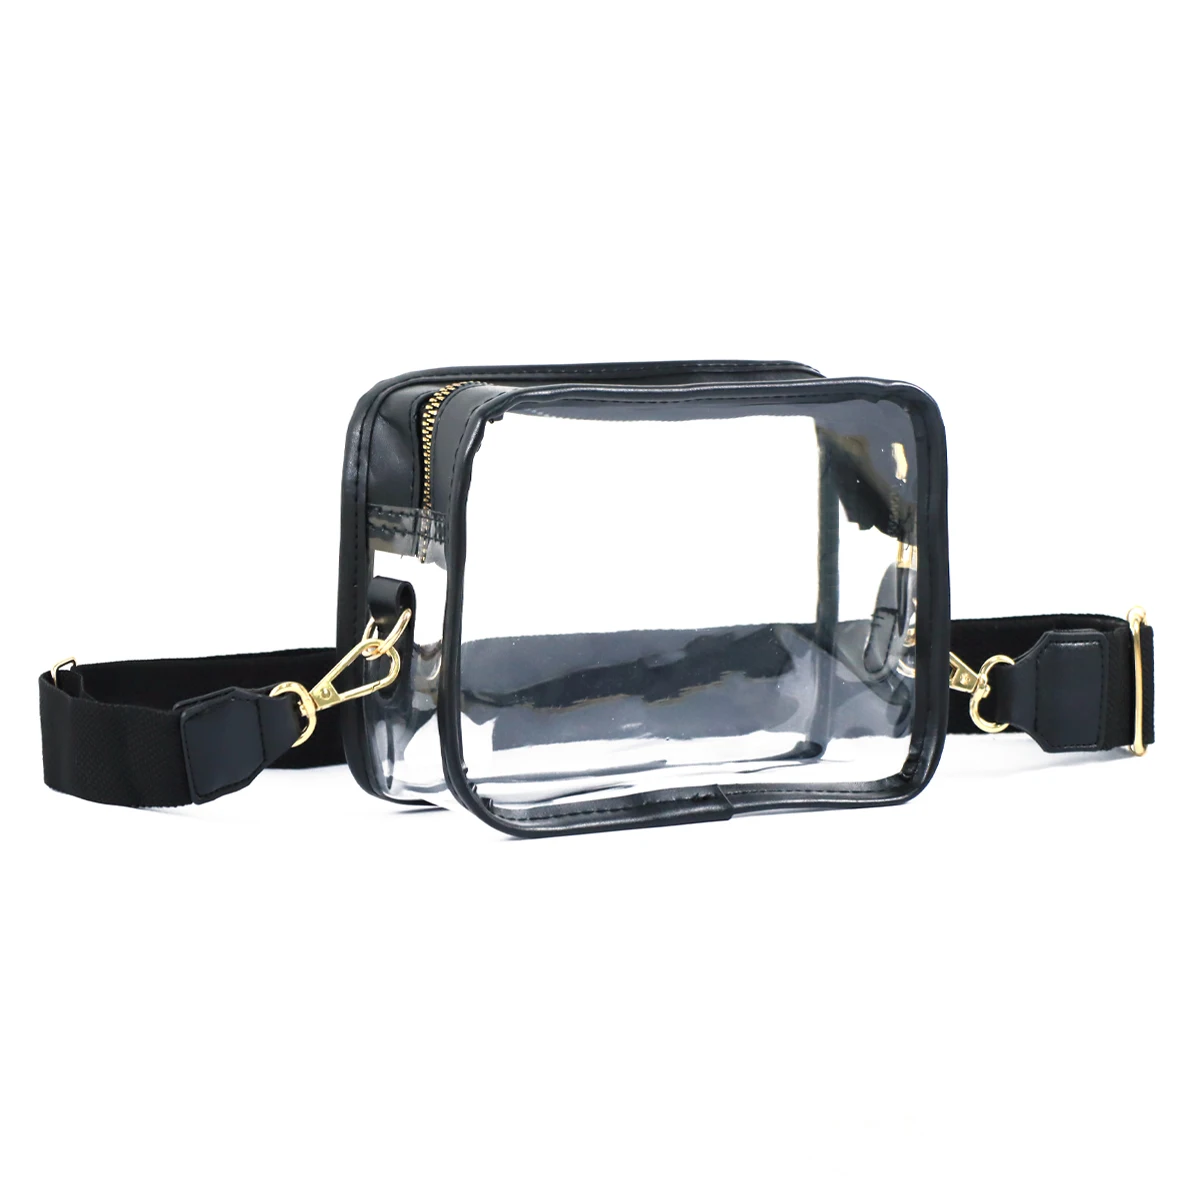 PVC Bag Transparent Envelope Fanny Pack Stadium Approved Clear Purse Bag for Concerts Sports Events